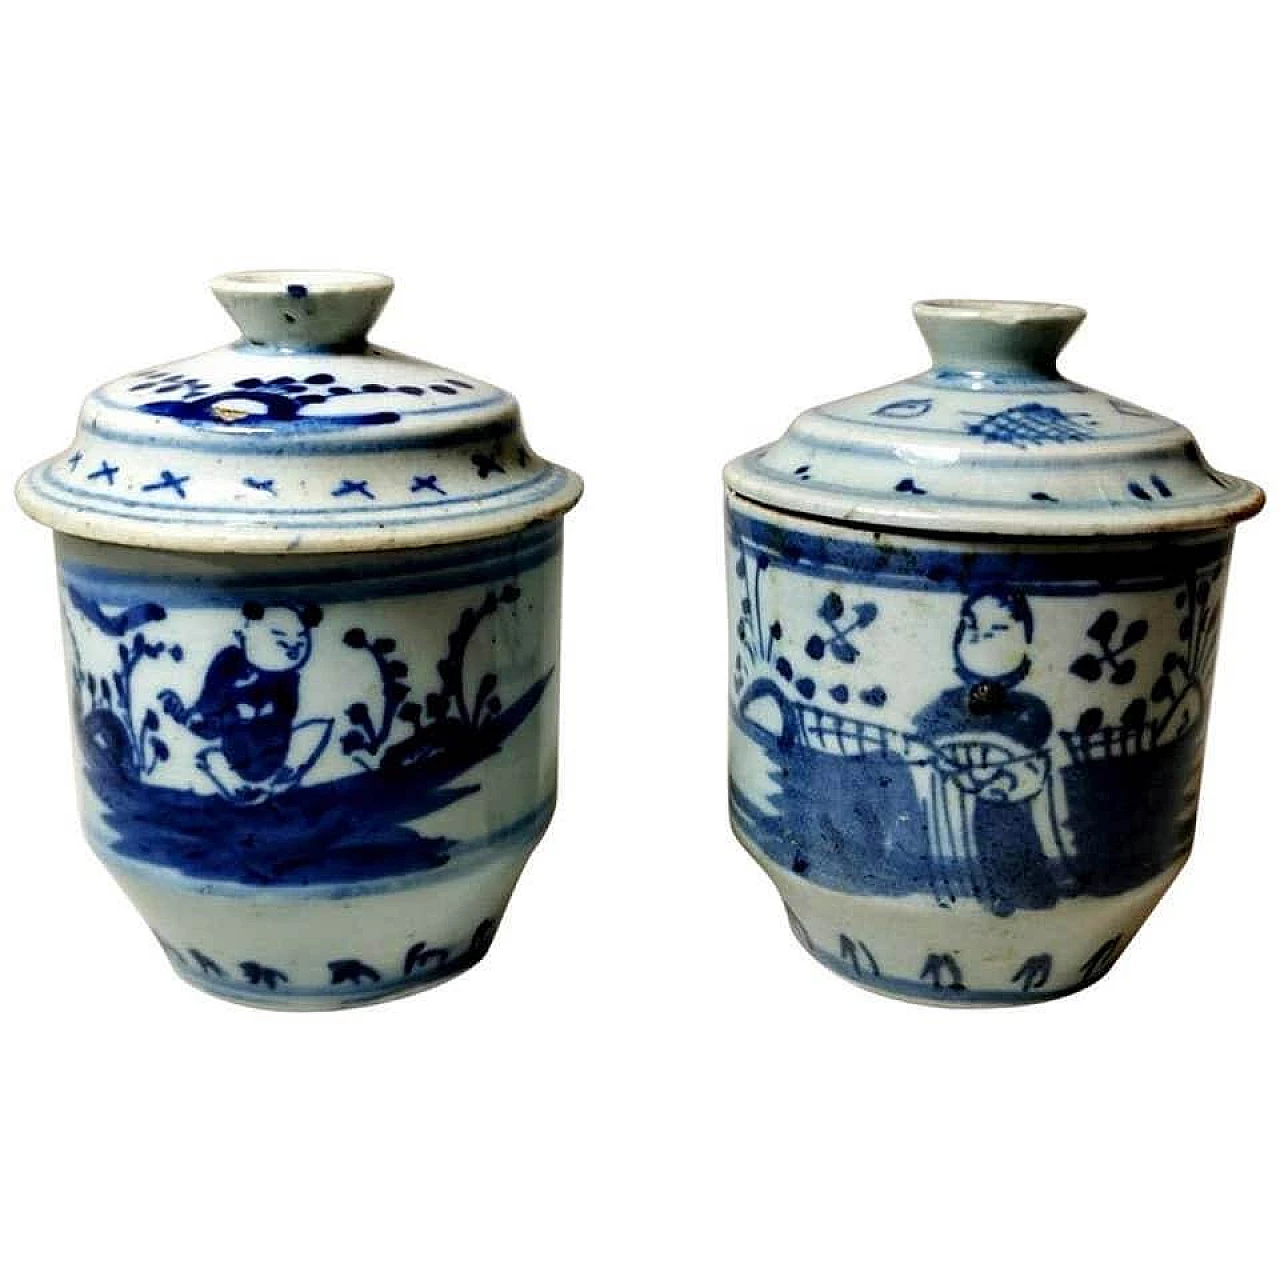 Pair of ginger jars in porcelain with decorations in cobalt blue, 18th Century 1188345